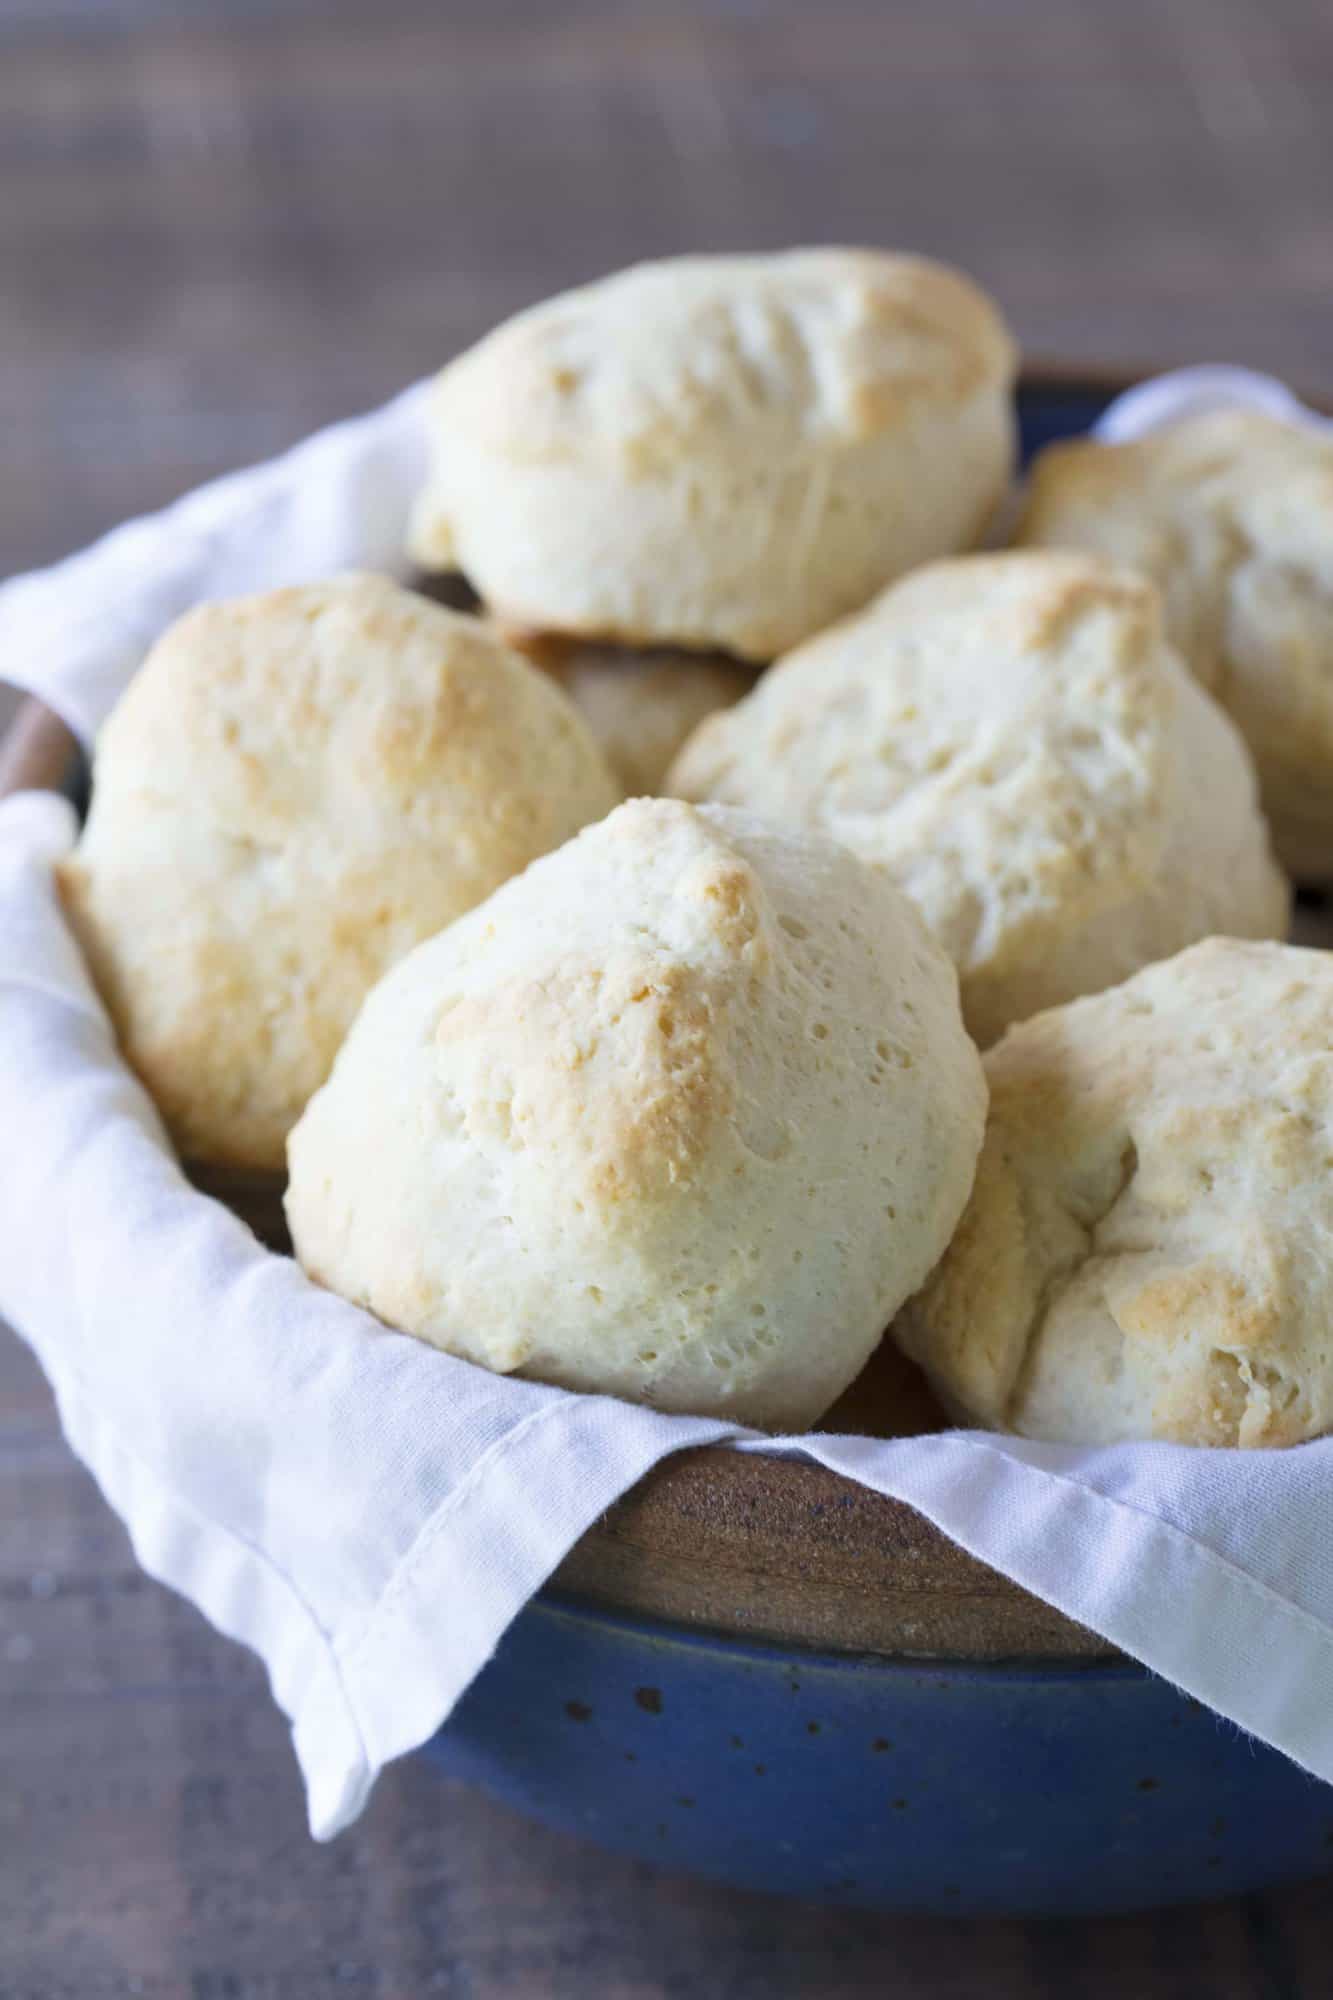 Nothing beats warm flaky old fashioned biscuits straight from the oven. These biscuits are easy to make and require just 6 ingredients. Try this fool proof old fashioned method!